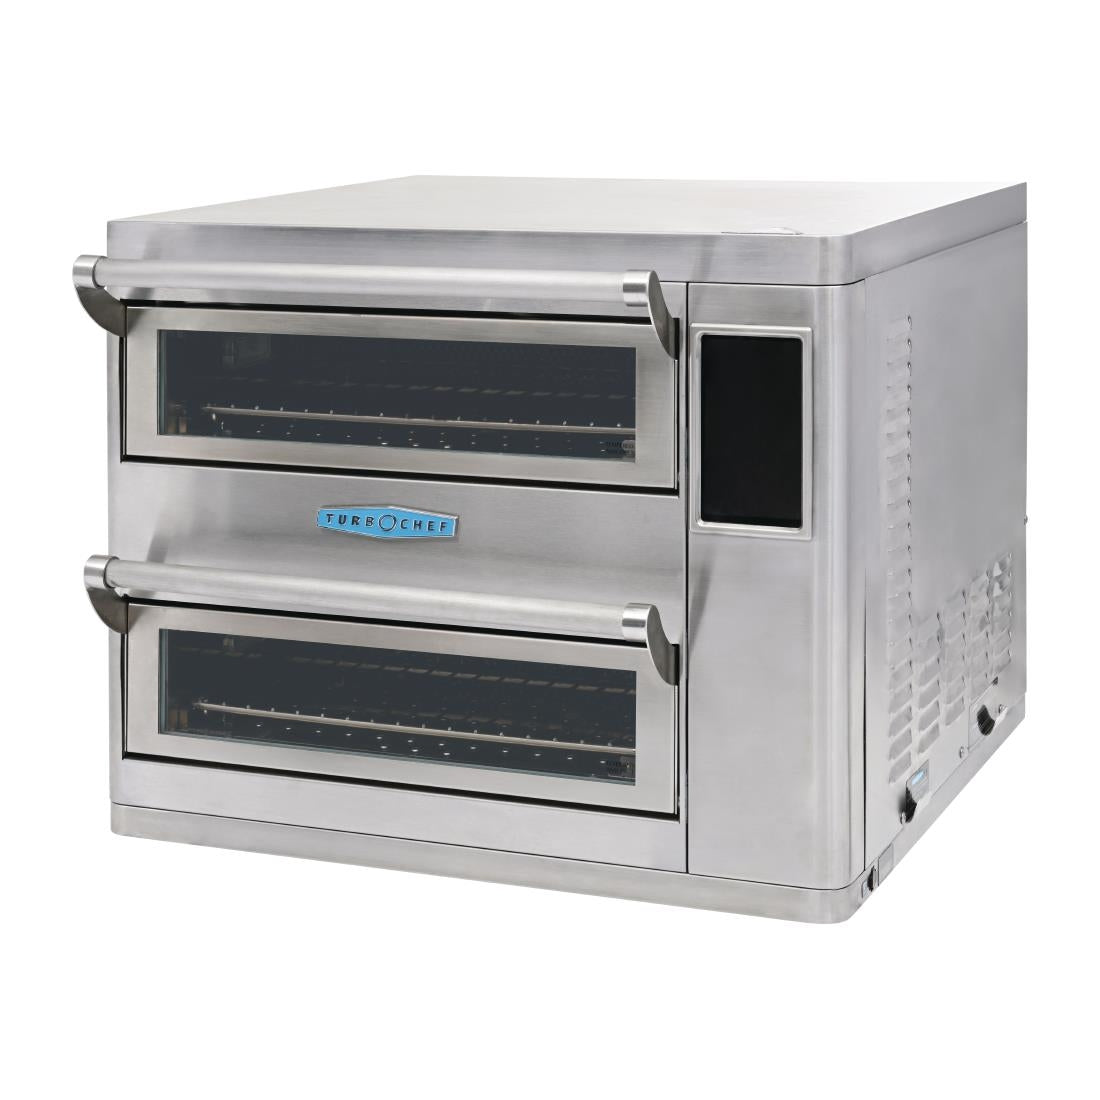 FP881 Turbochef Double Batch Oven JD Catering Equipment Solutions Ltd